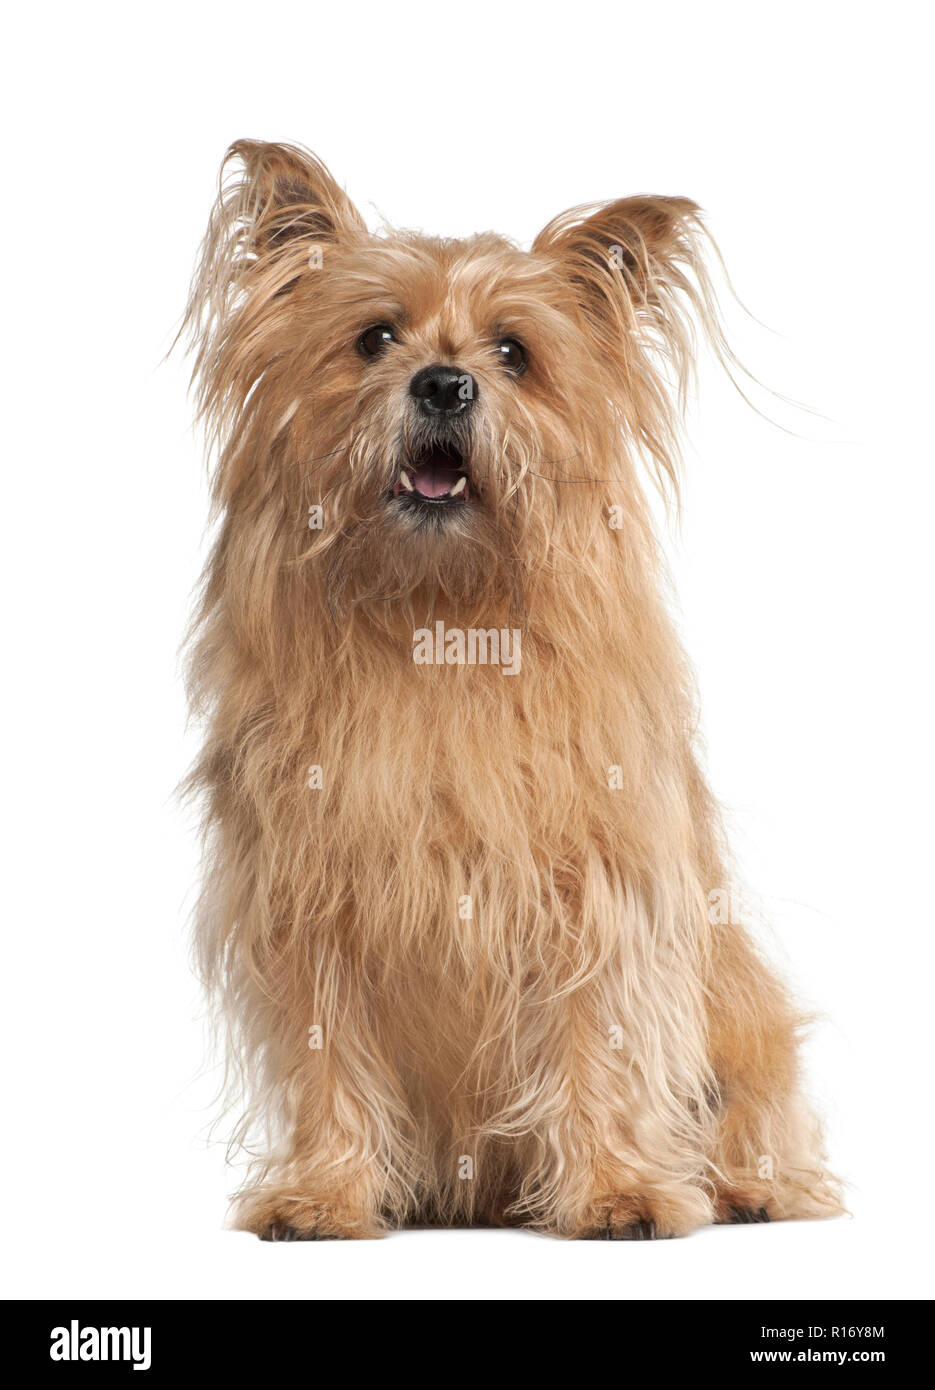 Cross breed, 8 years old, sitting against white background Stock Photo